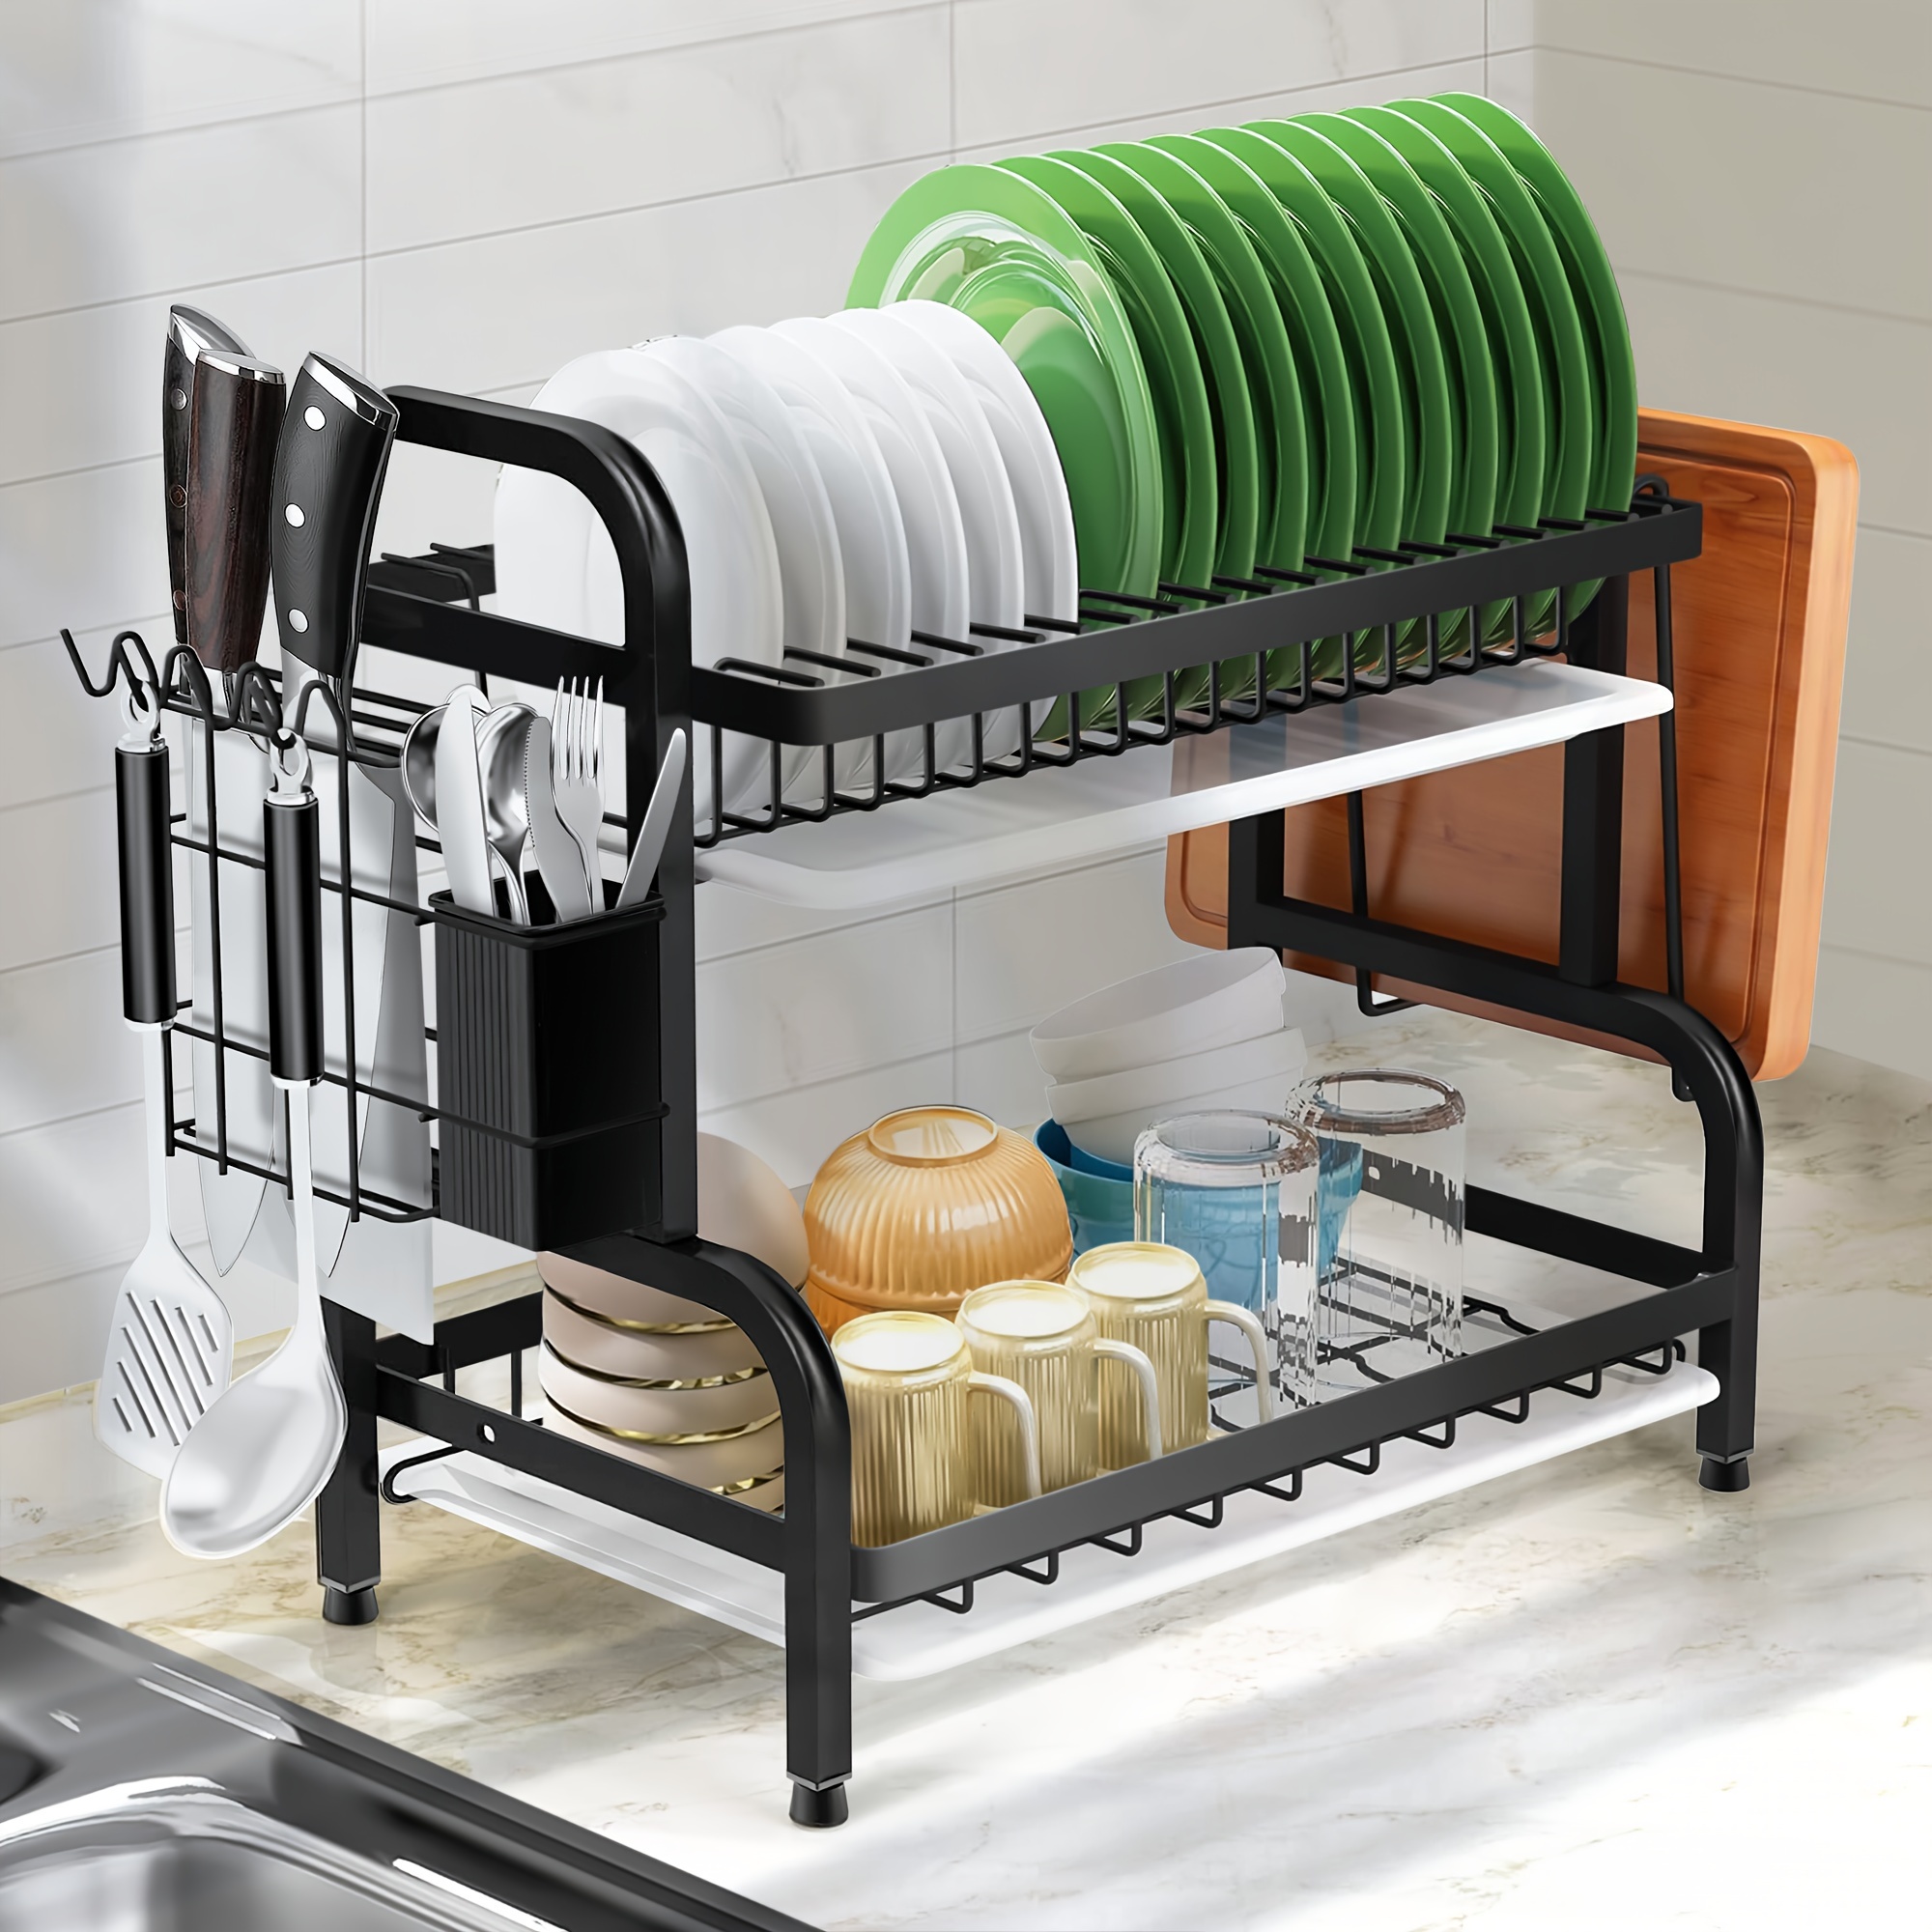 

2-tier Dish Rack For Kitchen, Dish Drying Rack With Drain Board Tray, Compact Dishing Rack With Utensil Holder, Cutting Board Holder, Kitchen Dishes Storage And Organizers